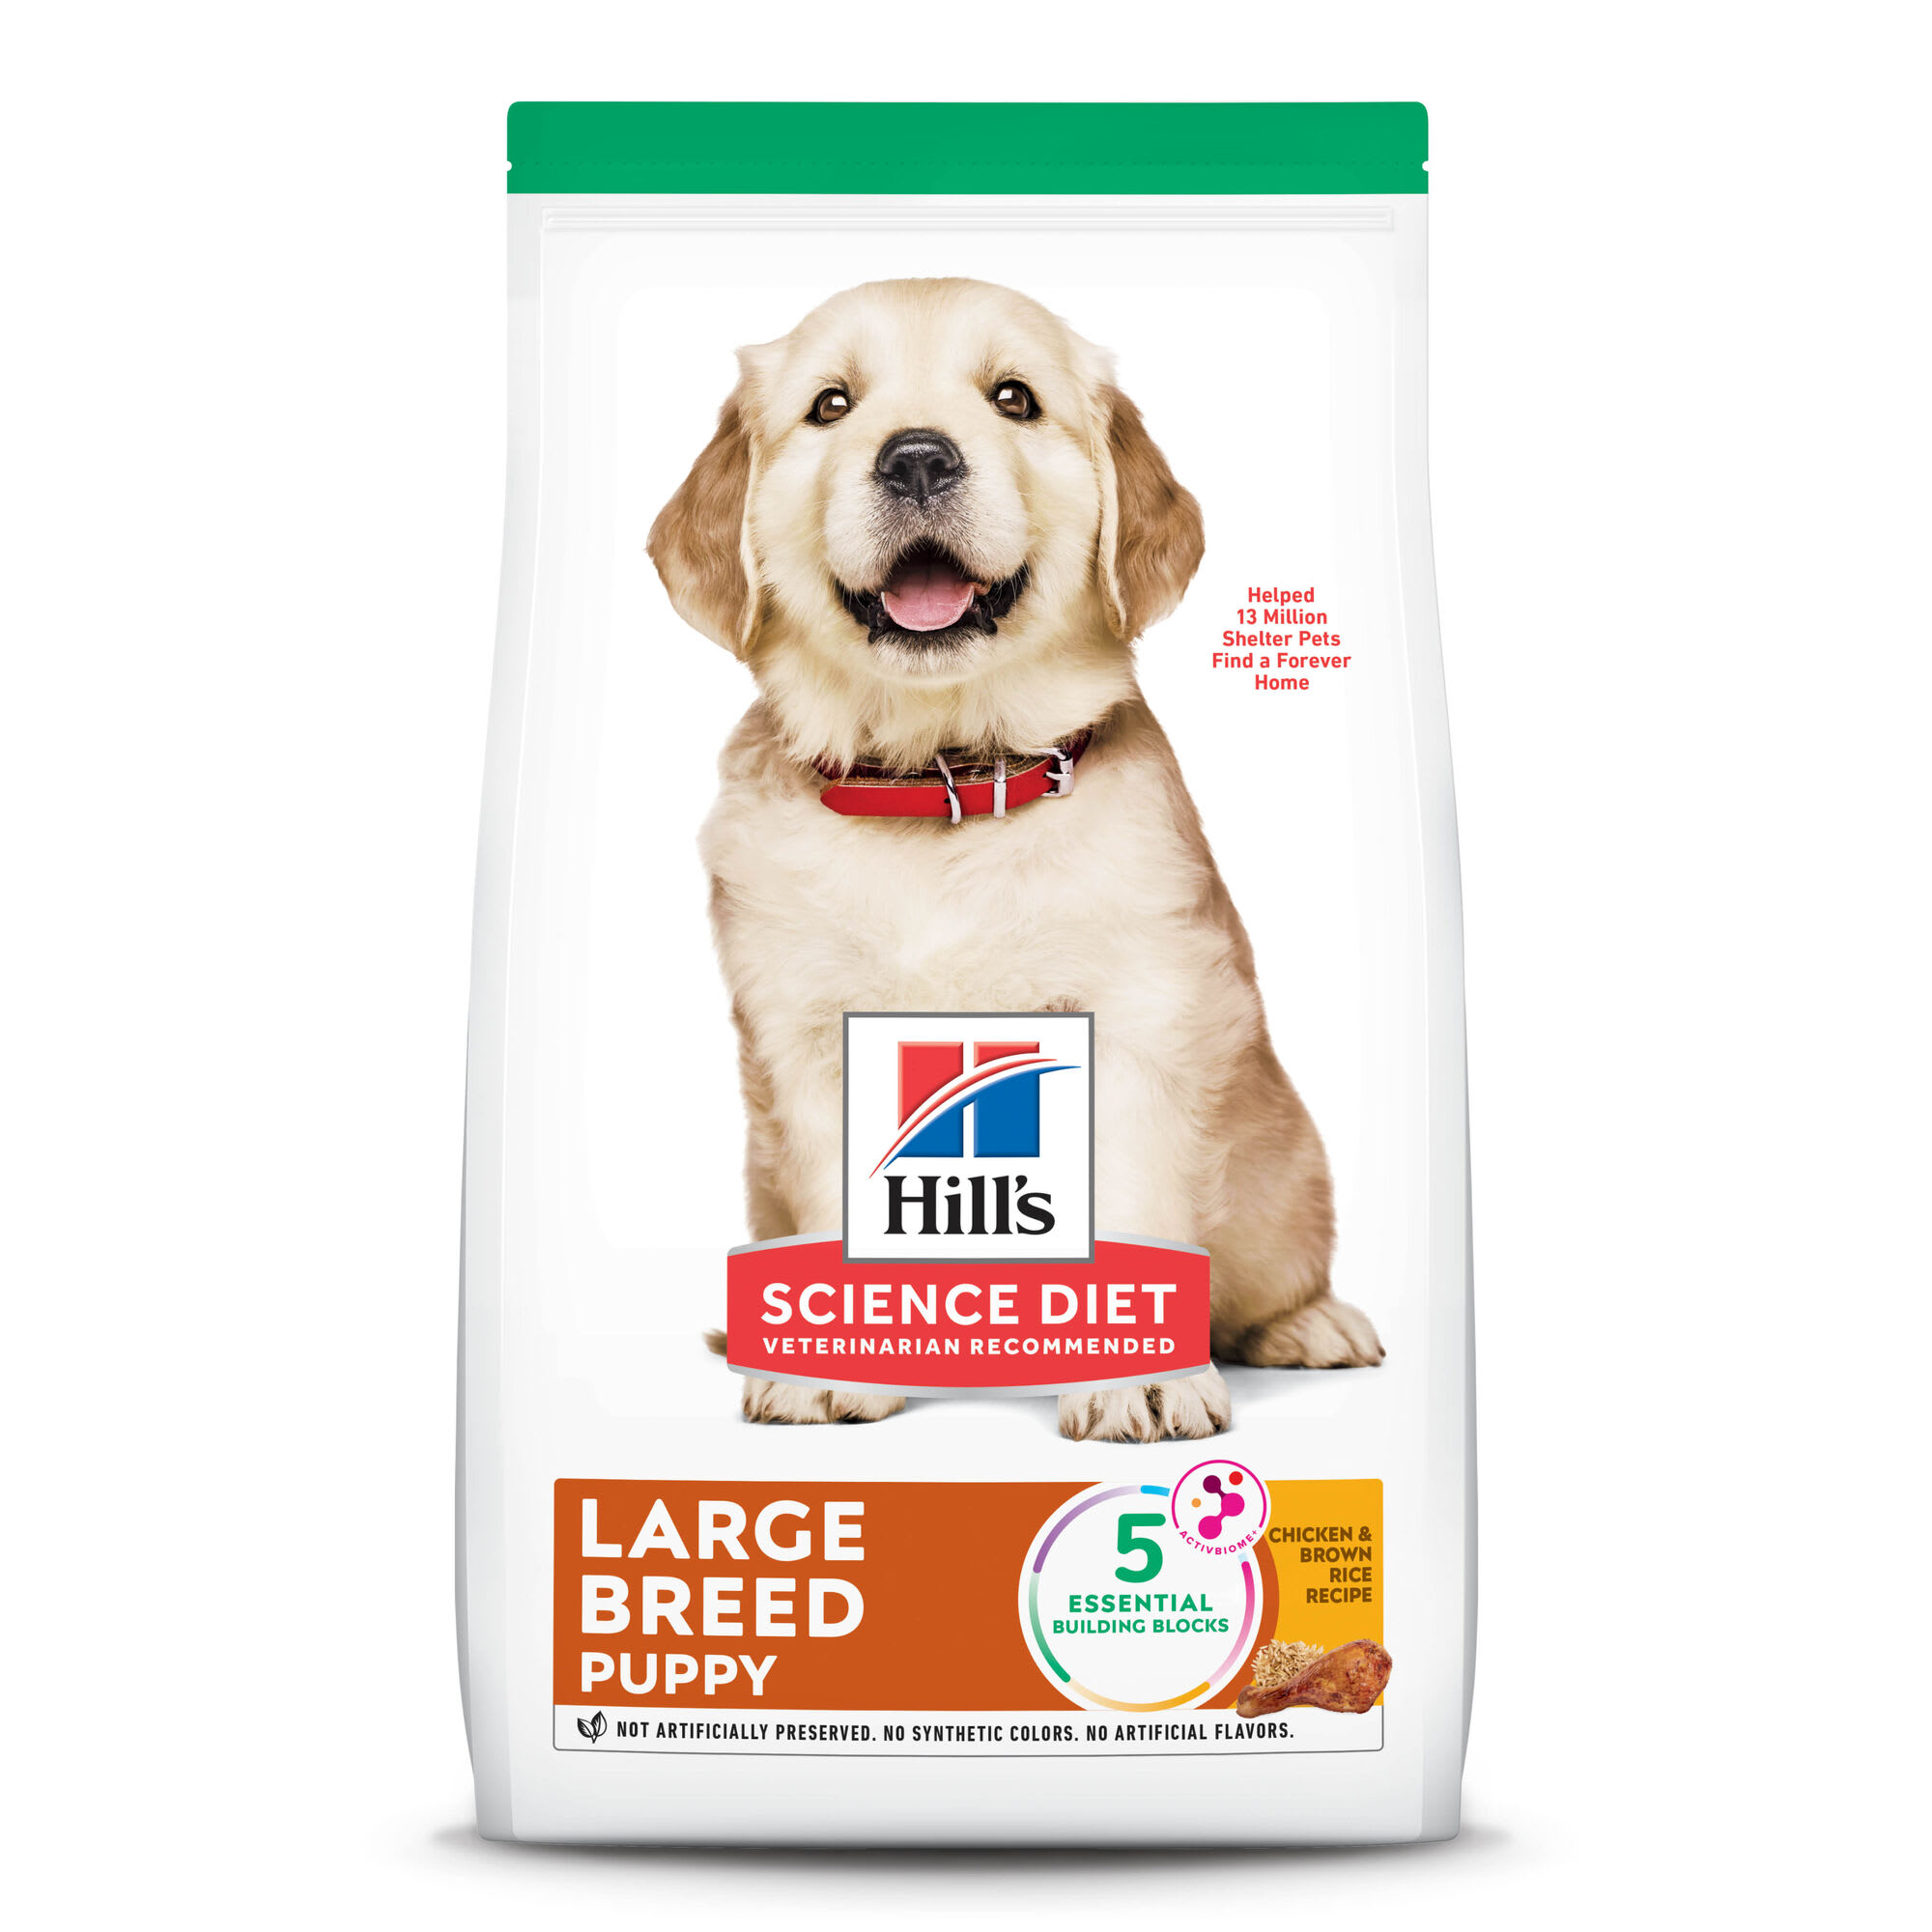 Photos - Dog Food Hills Hill's Hill's Science Diet Chicken & Brown Rice Recipe Large Breed Dry Pup 